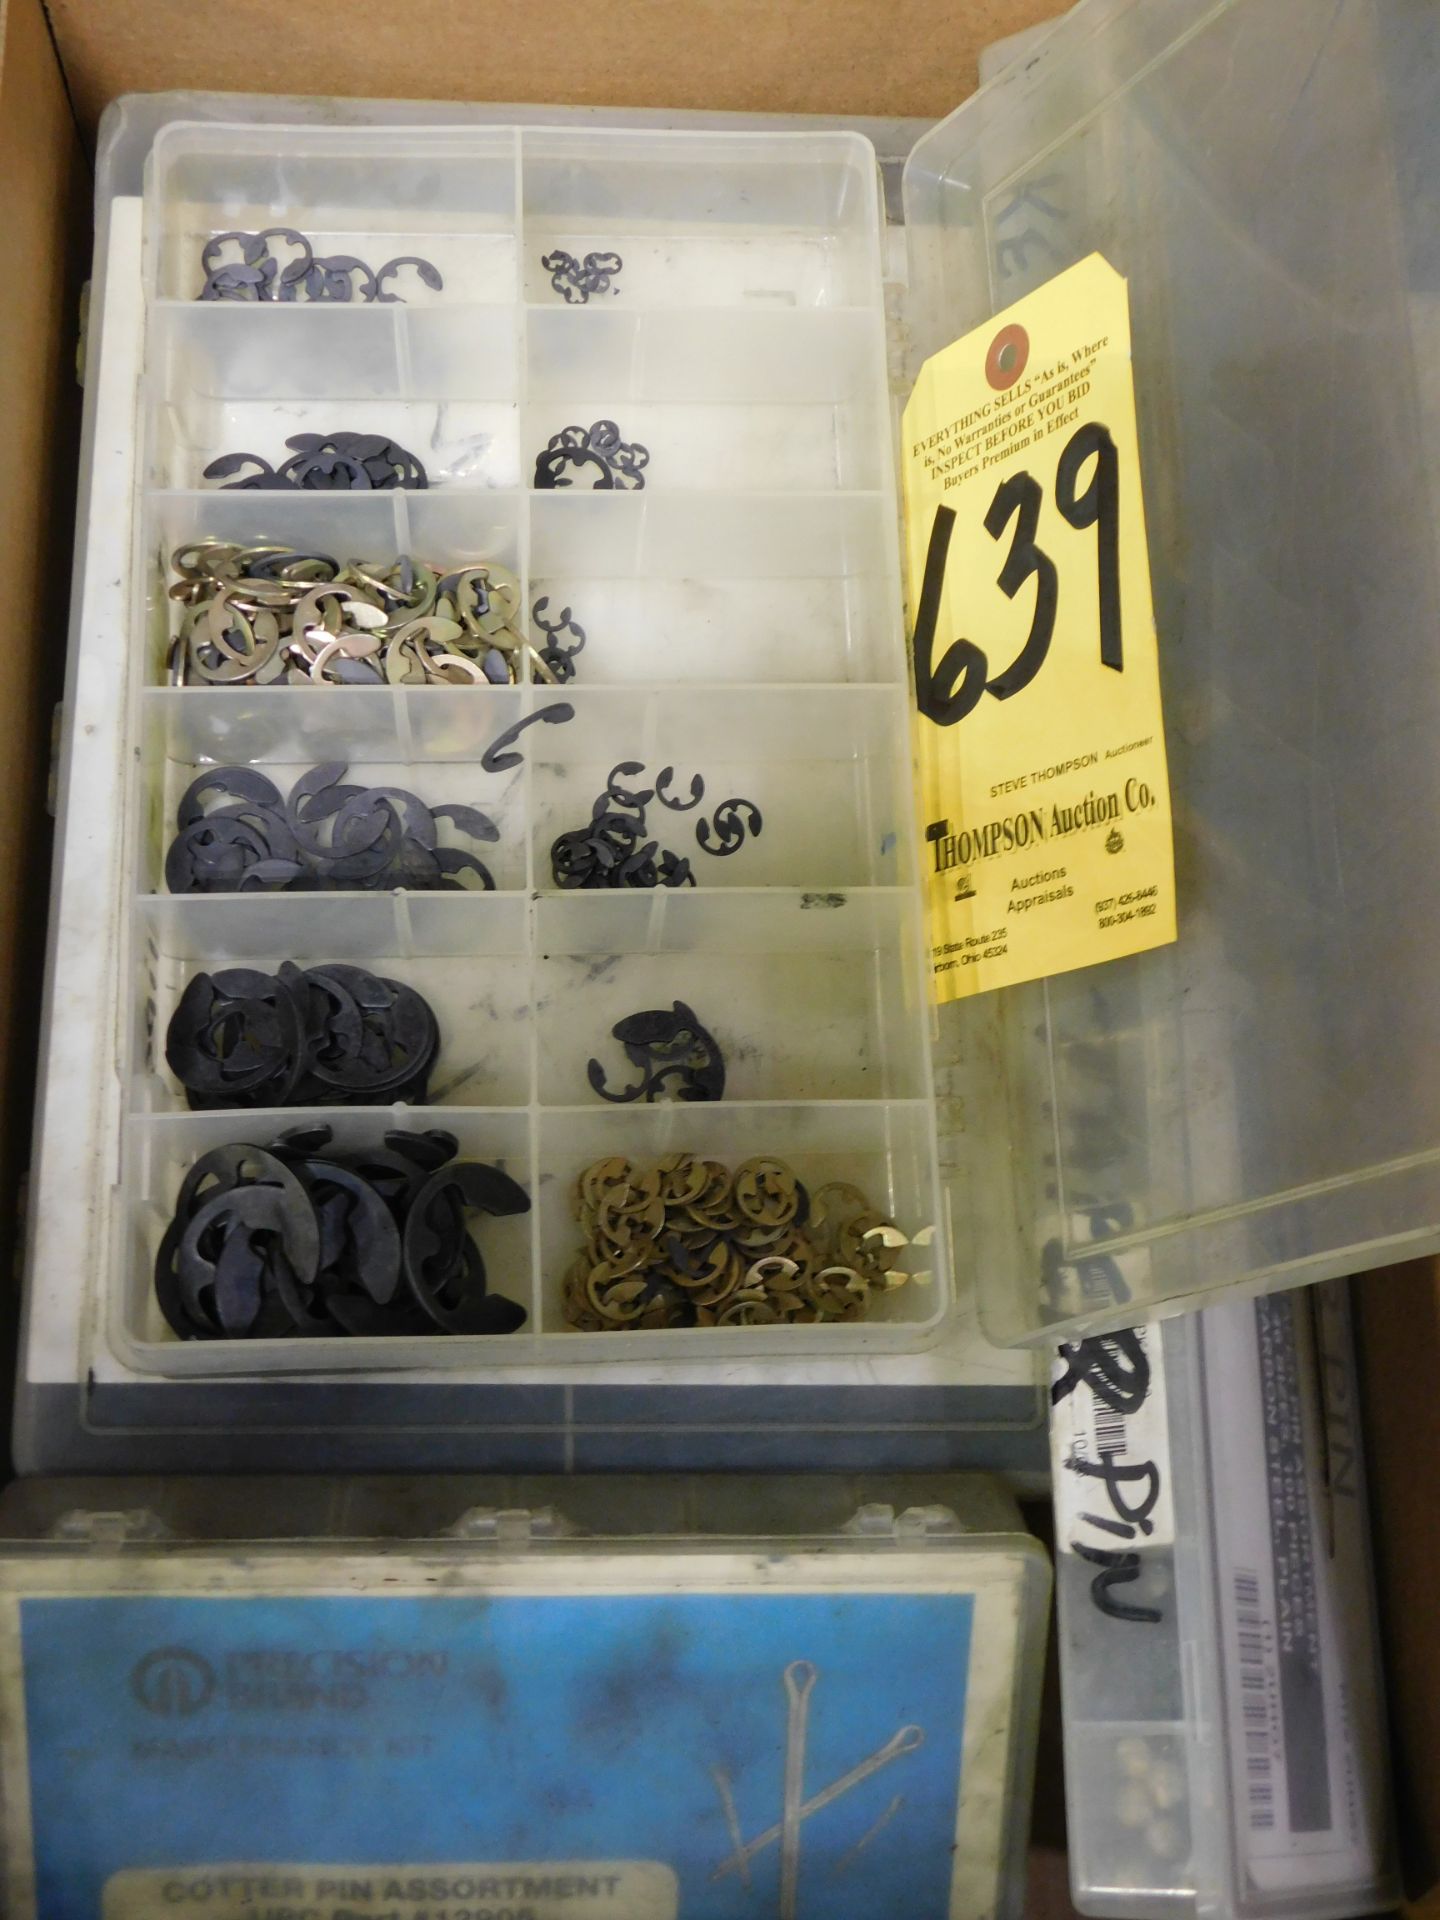 Miscellaneous Hardware Kits; Cotter Pins, C-Clips, Roll Pins, Taper Pins and Key Stock